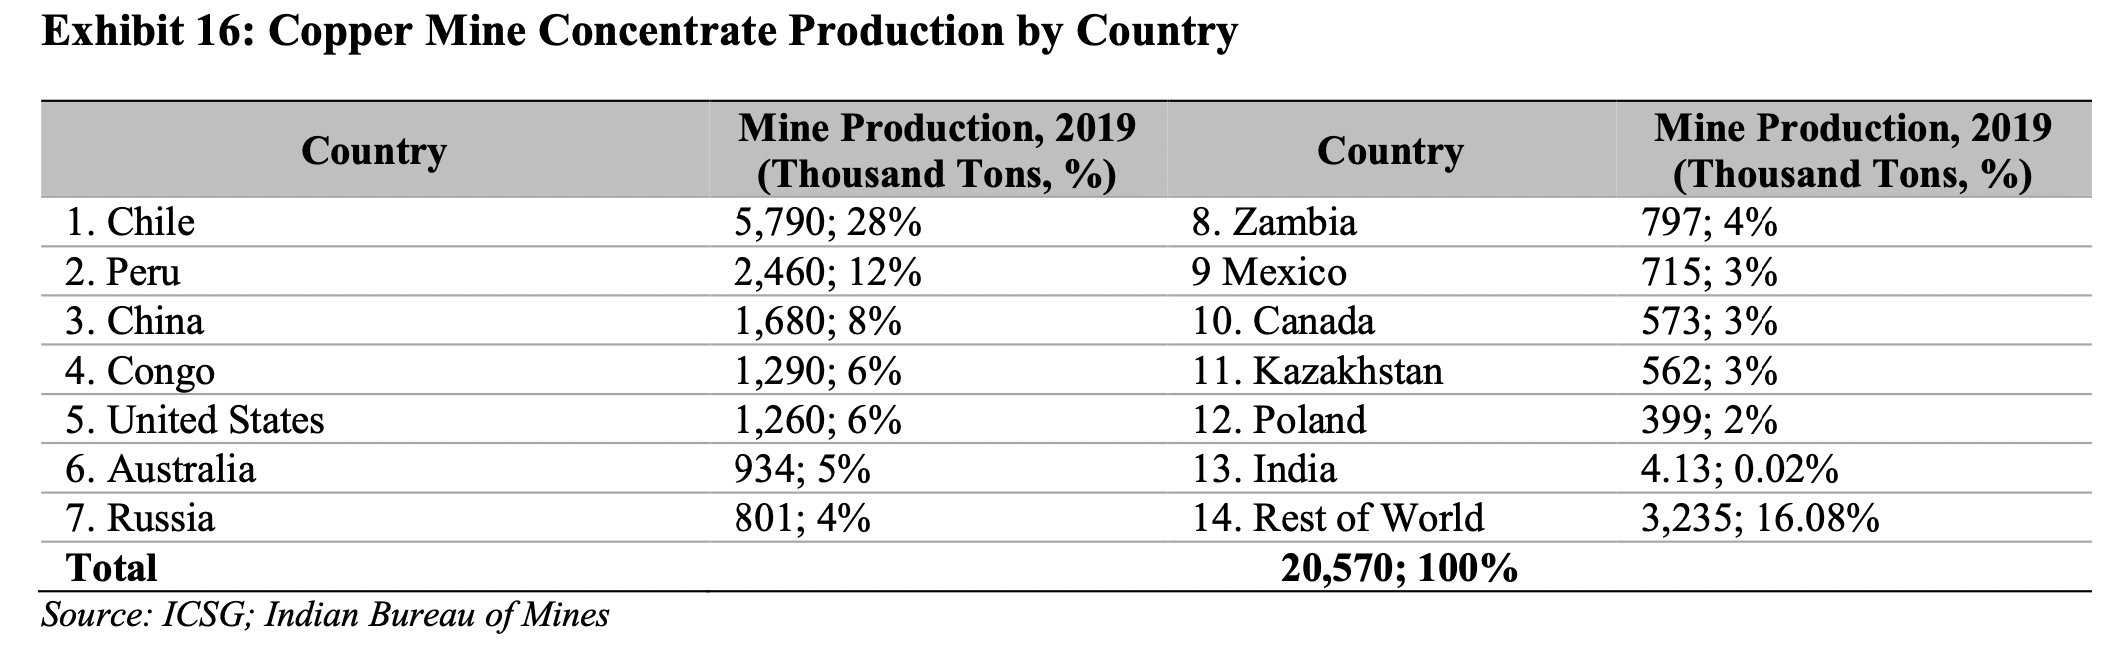 copper-mine-concentrate-production-by-country